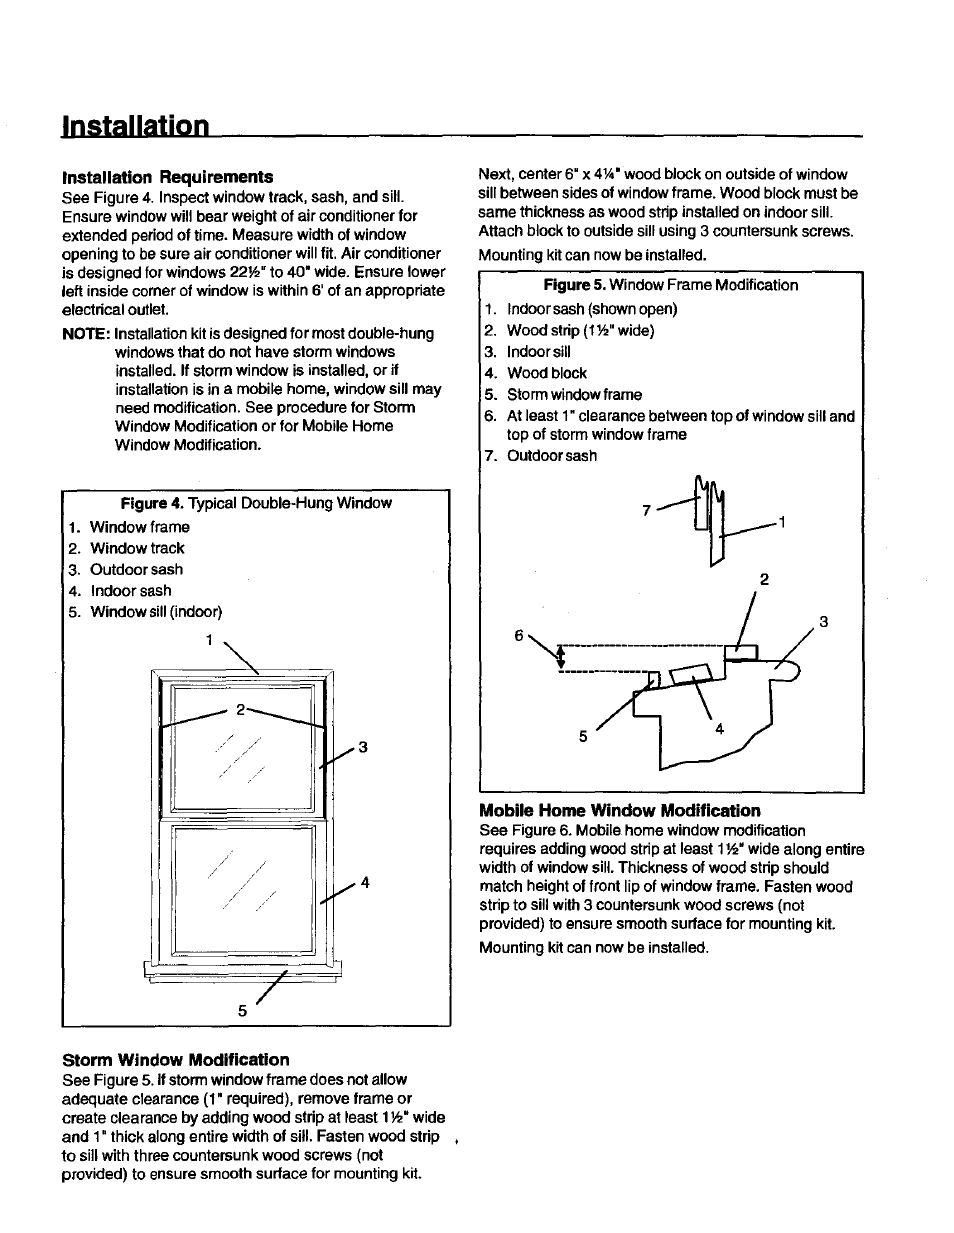 Installation requirements, Mobile home window modification, Storm window modification | Installation | Kenmore 70089 User Manual | Page 8 / 28